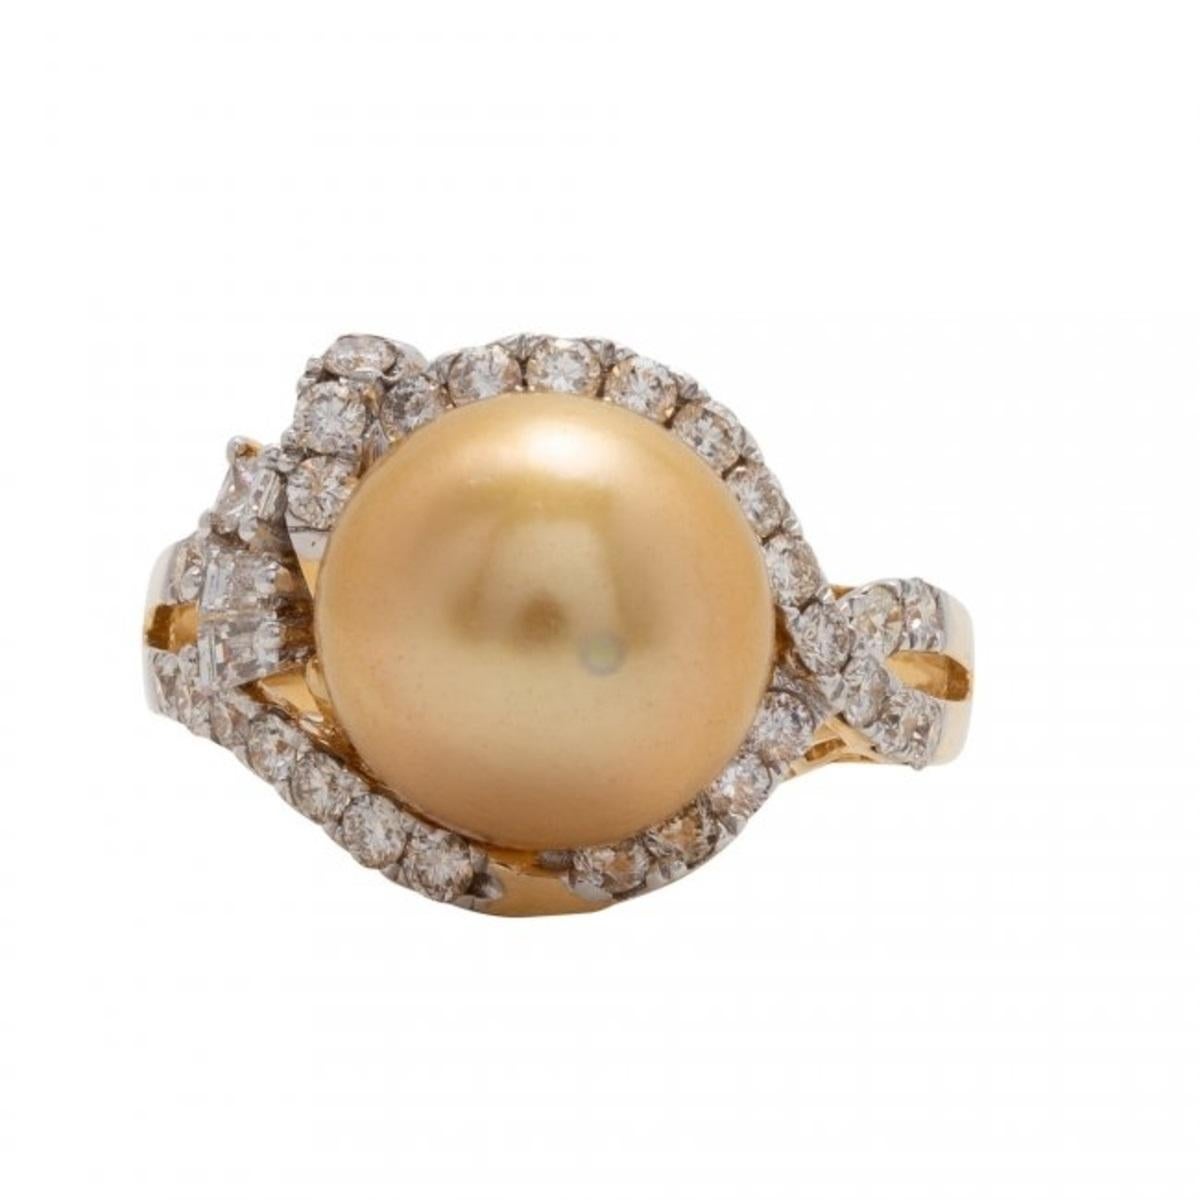 
South Sea Pearl and Diamond Ring 
Set with 32 diamonds weighing approximately .88 carat
Mounted in 18kt yellow gold
8.43 grams (gross)
Size 6 3/4